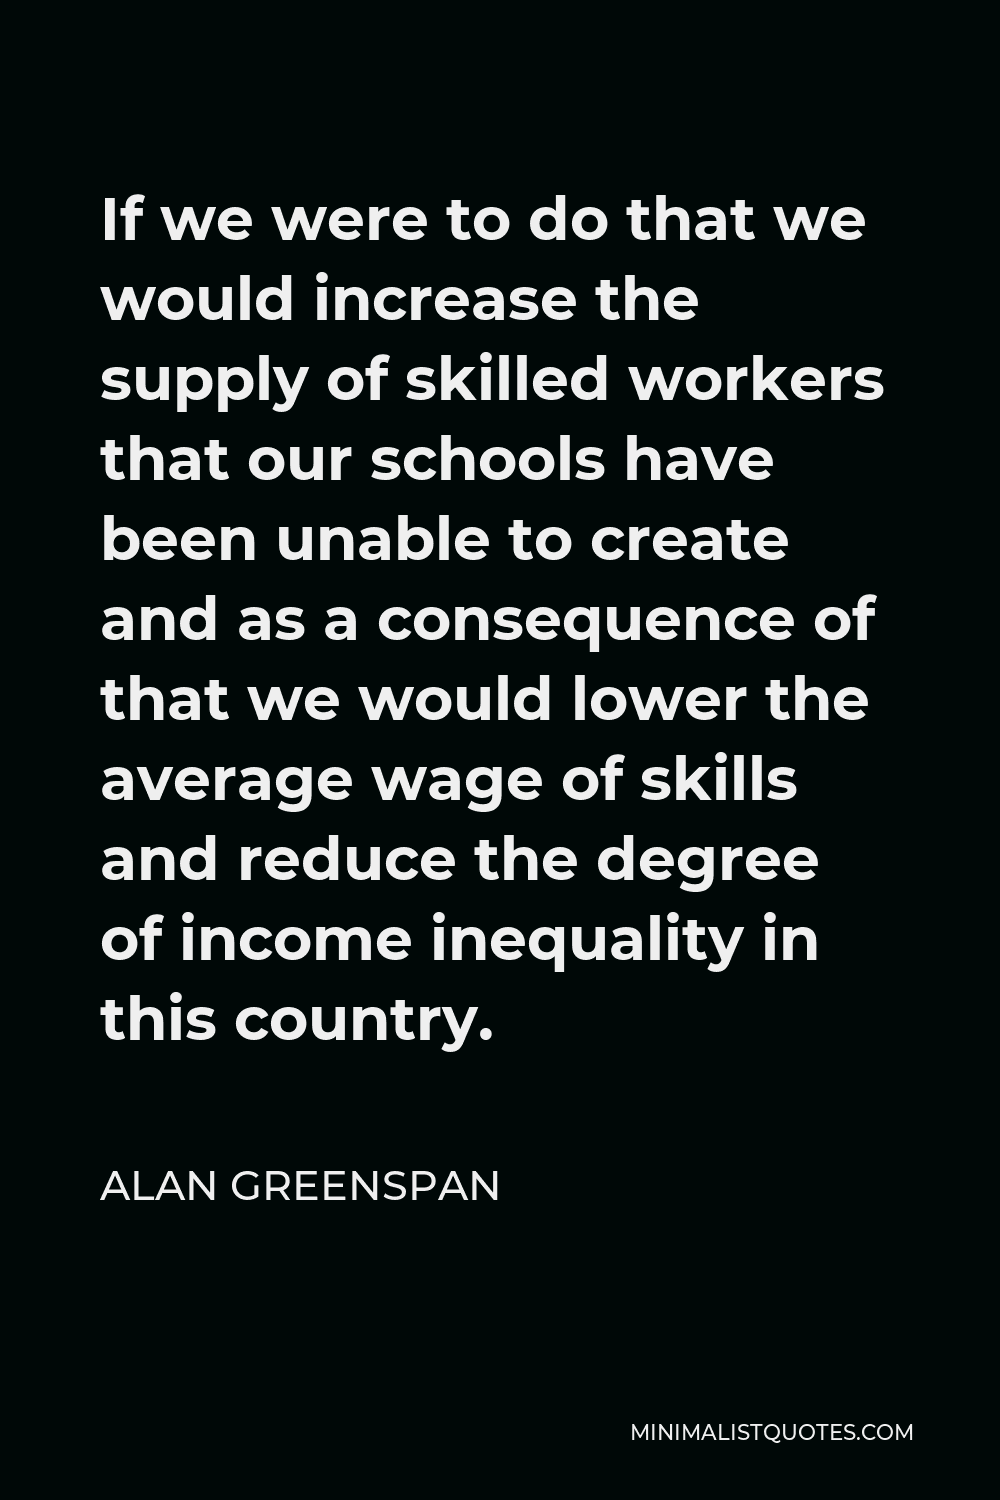 Alan Greenspan Quote - If we were to do that we would increase the supply of skilled workers that our schools have been unable to create and as a consequence of that we would lower the average wage of skills and reduce the degree of income inequality in this country.